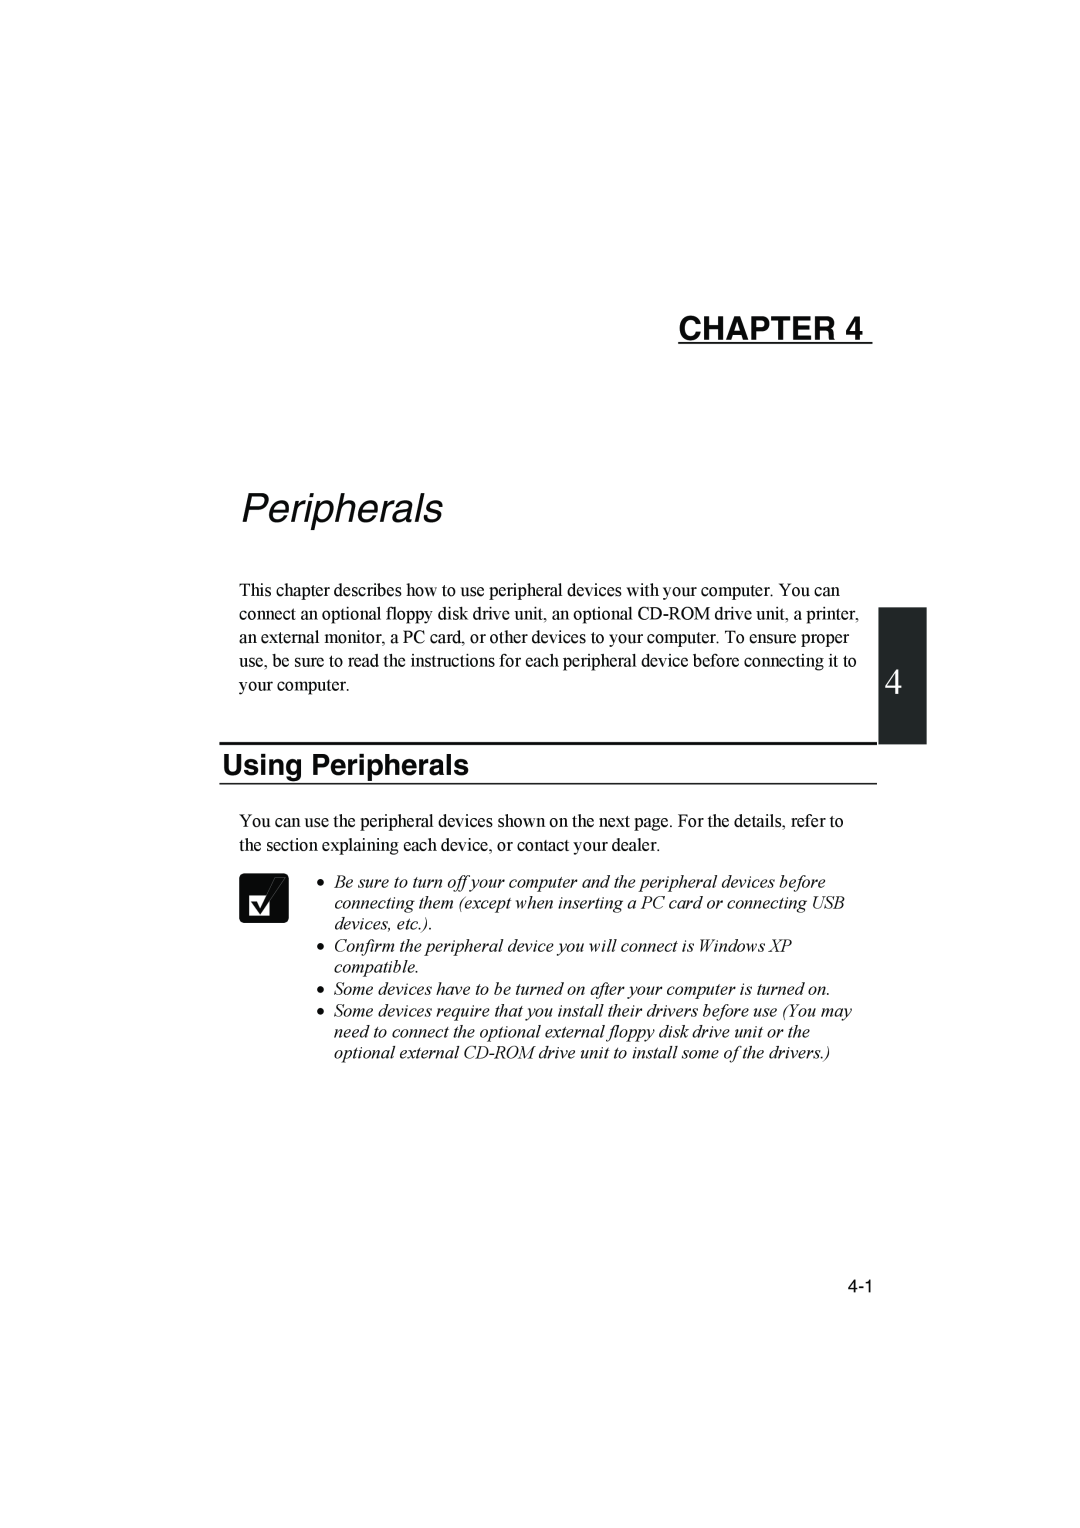 Sharp PC-MM1 manual Using Peripherals, Chapter 